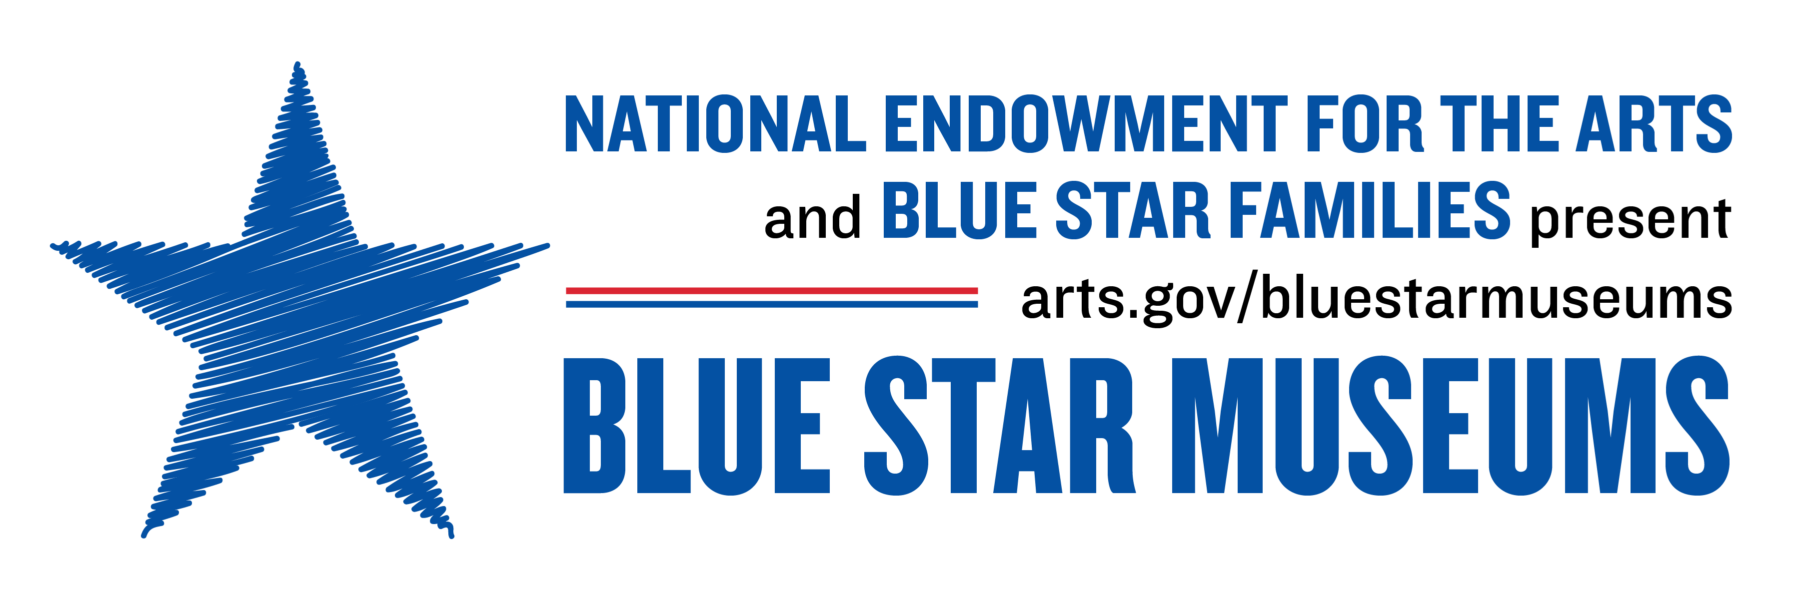 Blue Star Museum Graphic - National Endowment for the Arts and Blue Star Families present Blue Star Museum